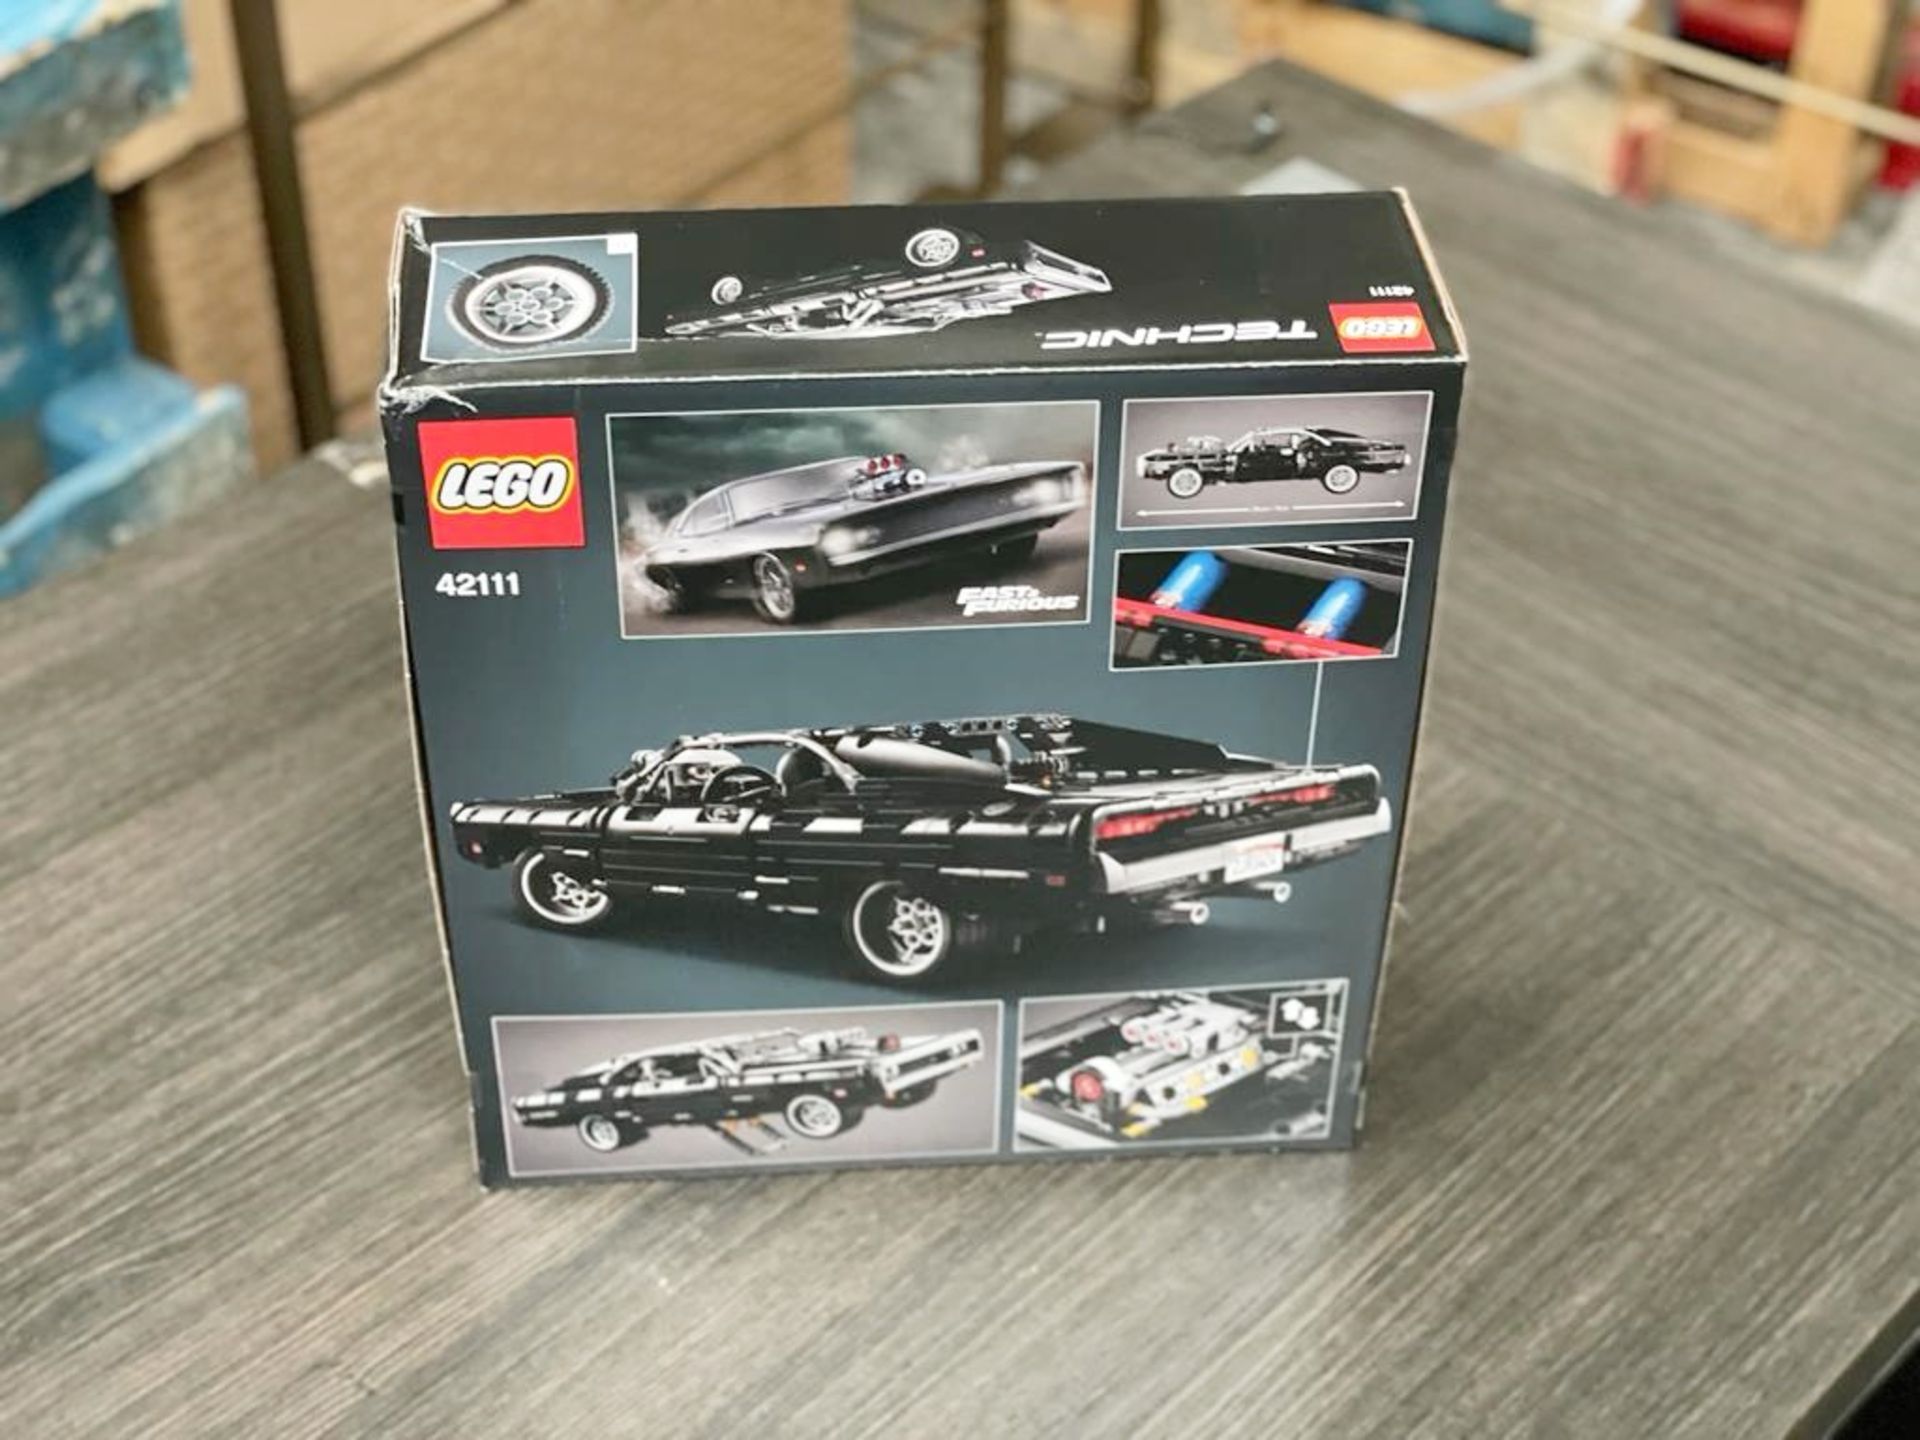 1 x Lego 42111 Technic Fast And Furious Dom's Dodge Charger - Brand New - RRP £89.99 - CL987 - - Image 4 of 4